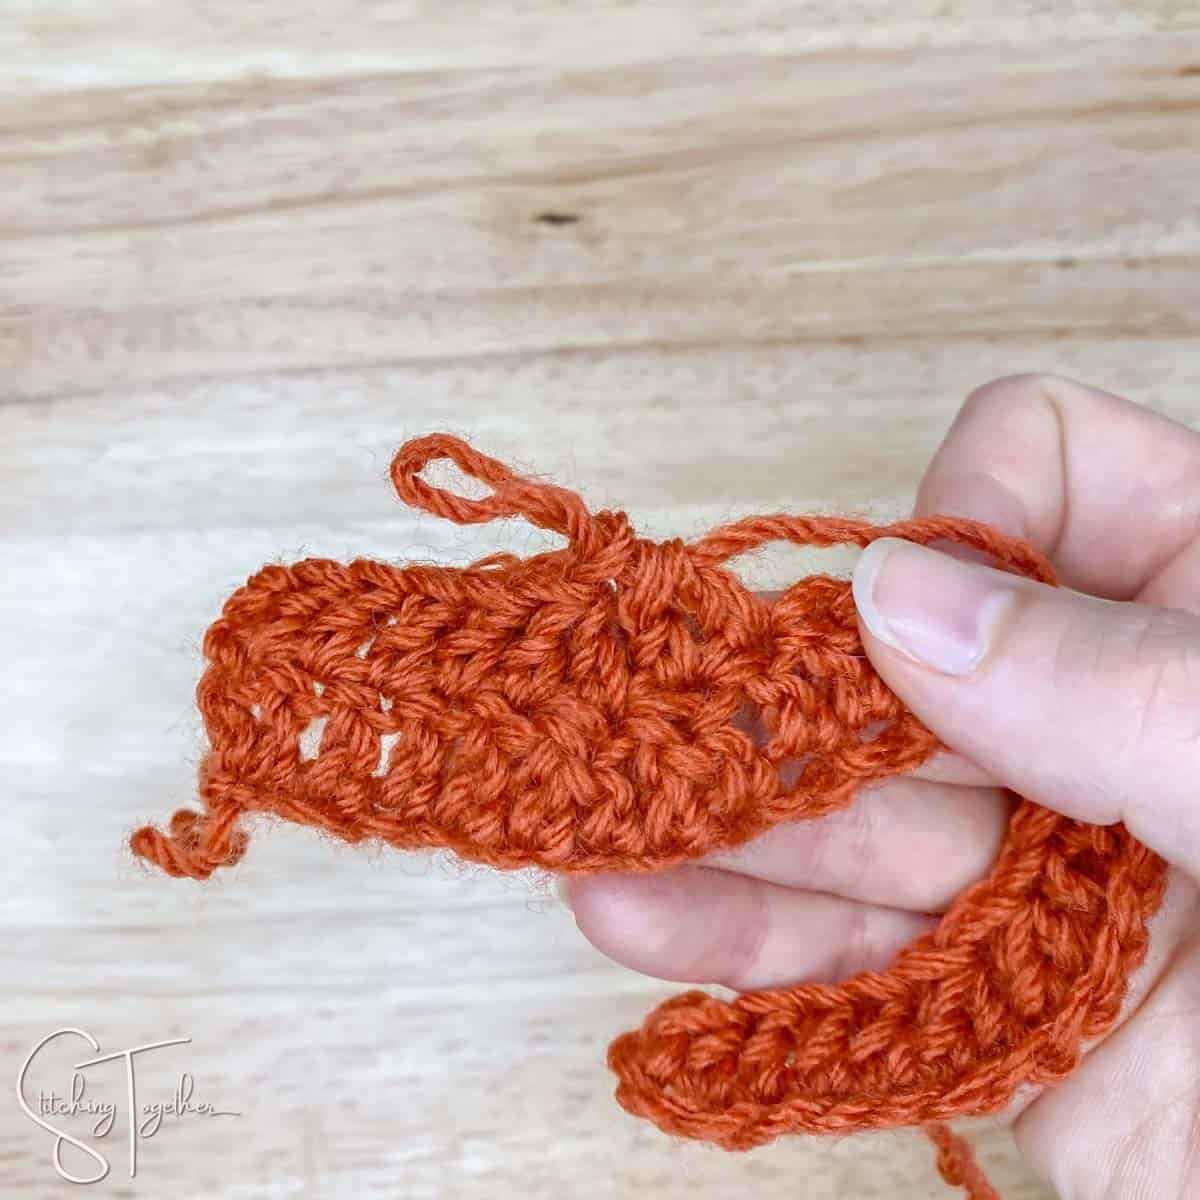 double crochet 2 together